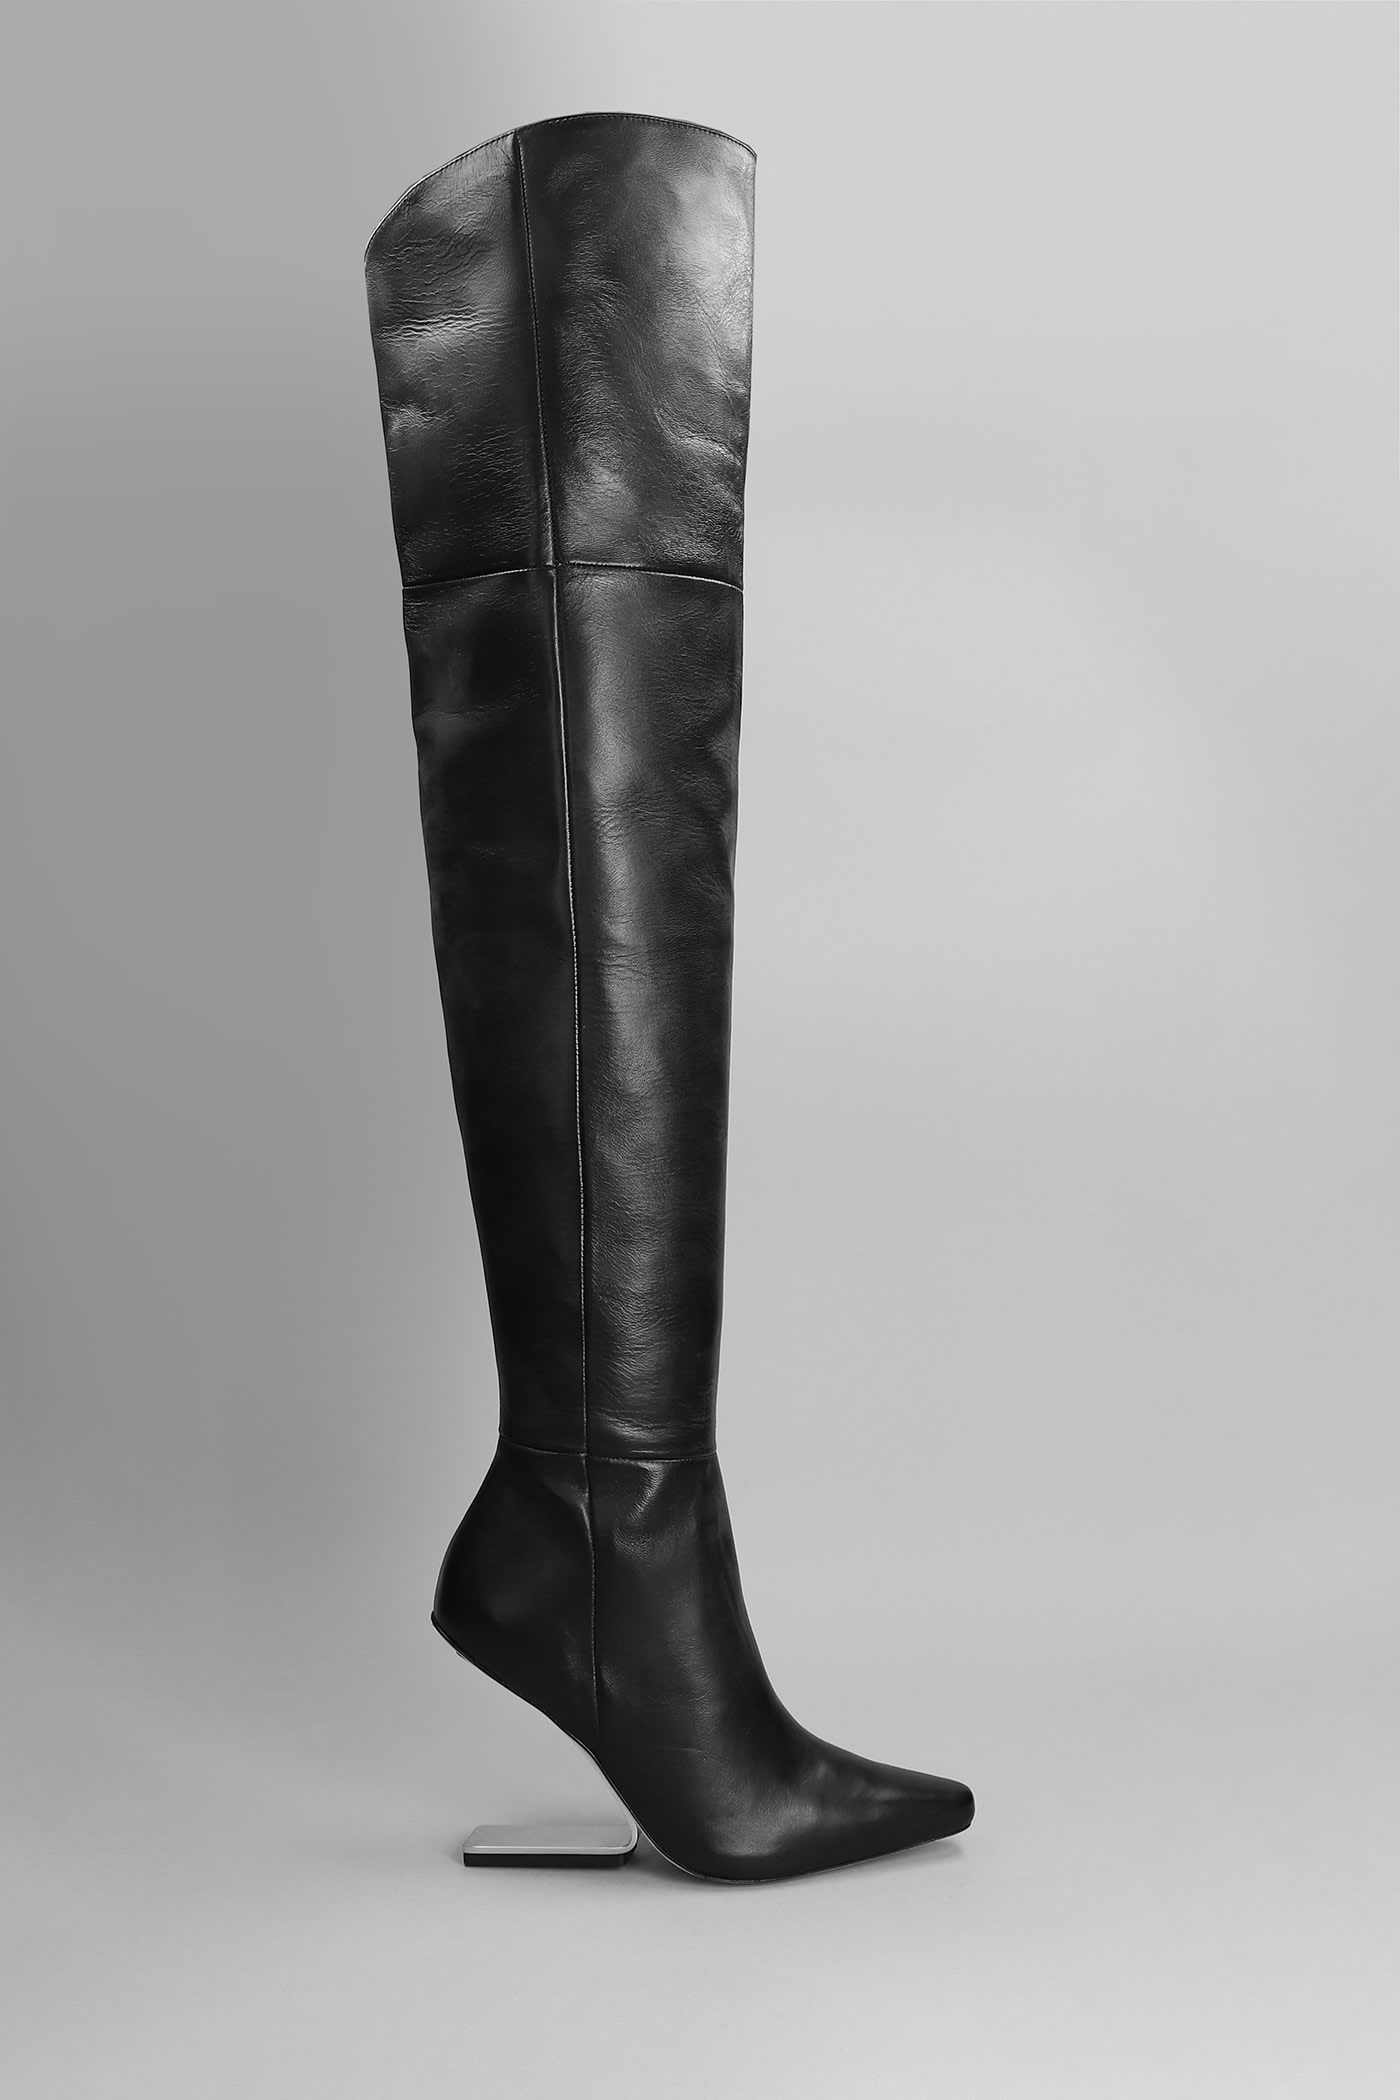 Cult Gaia High Heels Boots In Black Leather